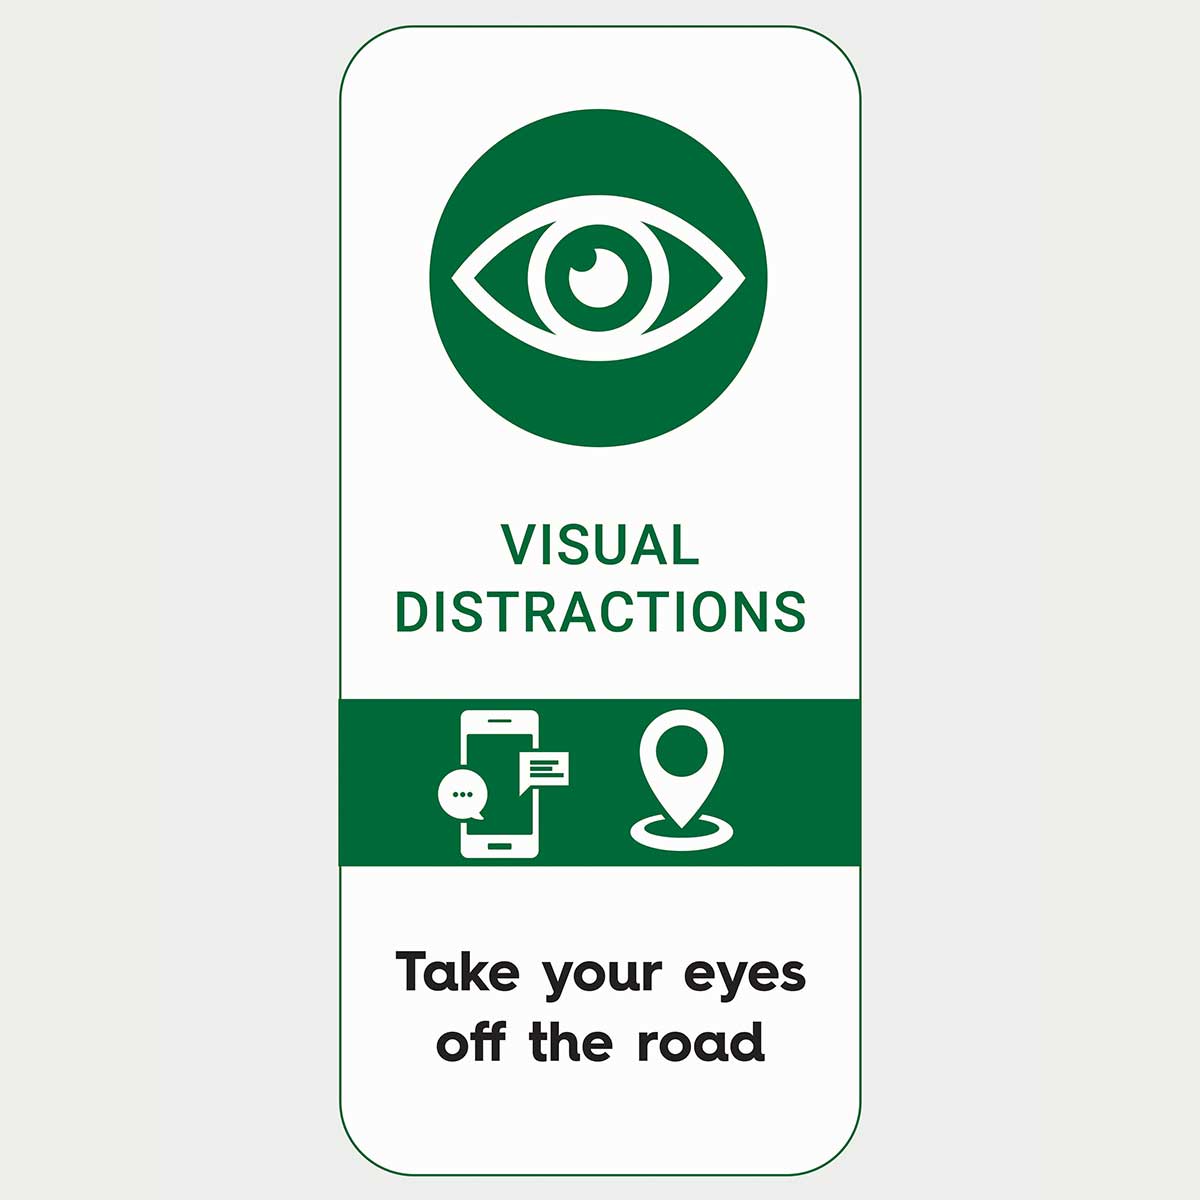 Do you know the three main types of distractions you can encounter while driving? The first type is visual distraction, such as a phone or GPS, which takes your eyes off the road. #JustDrive #DDAM